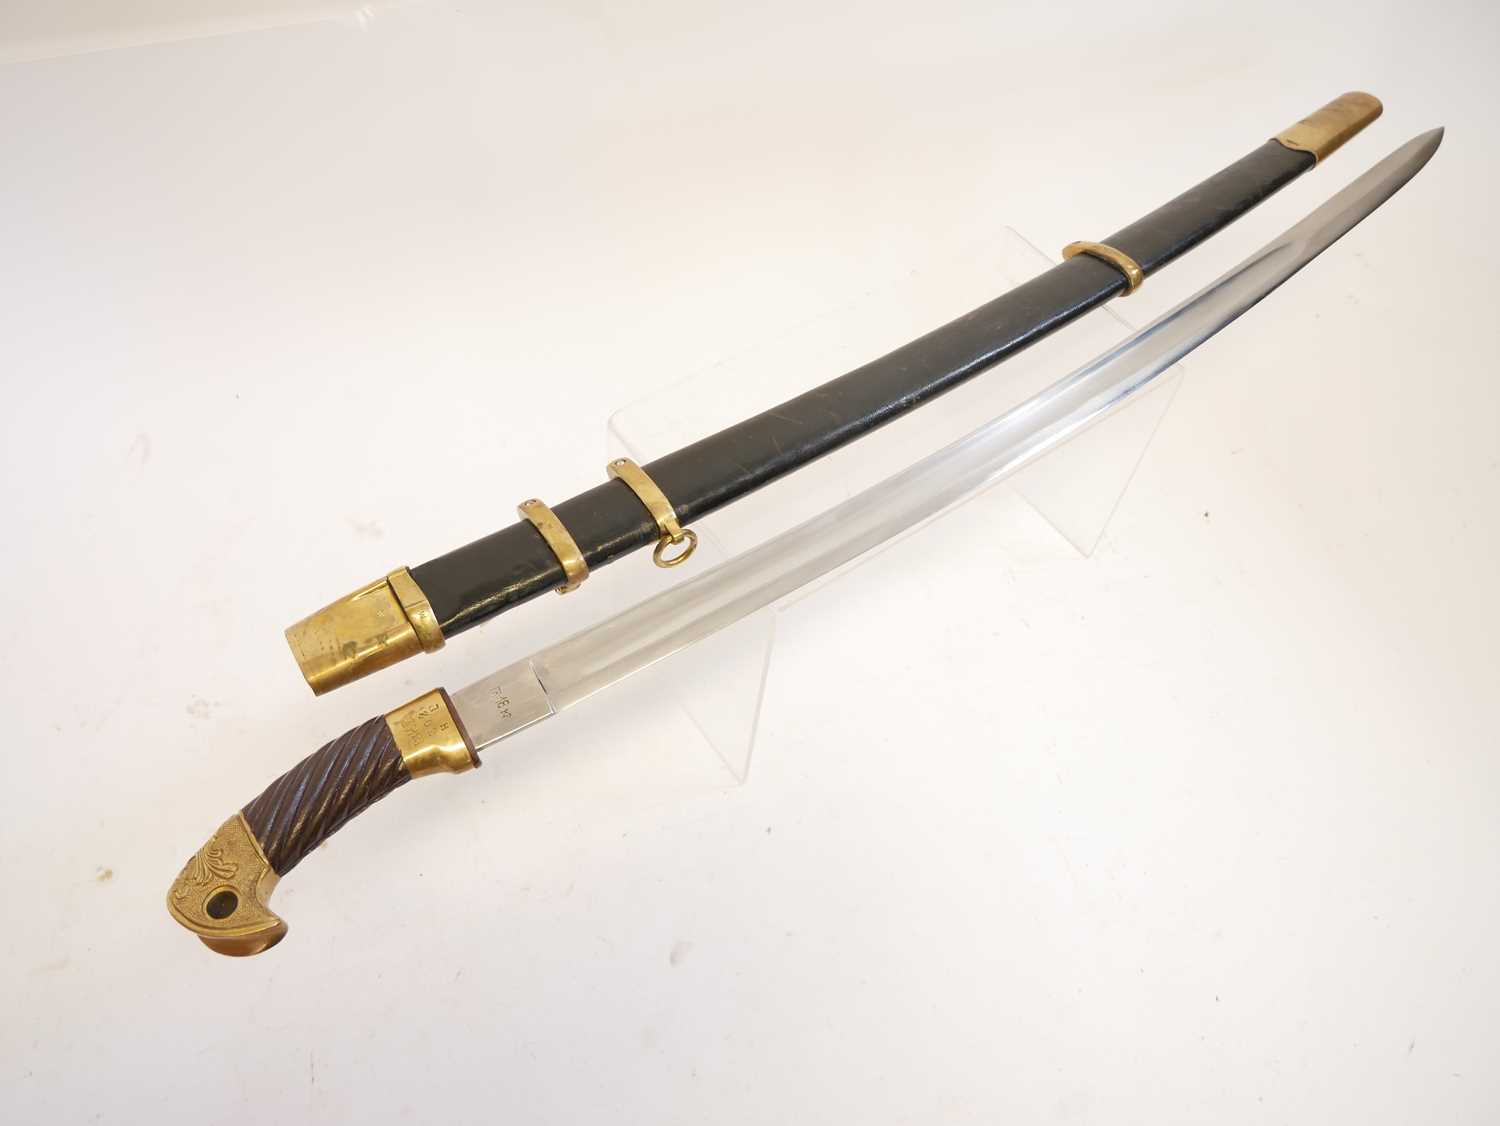 Reproduction copy of a Russian Cossak Shaska sword and scabbard. Buyer must be over the age of 18. - Image 2 of 9